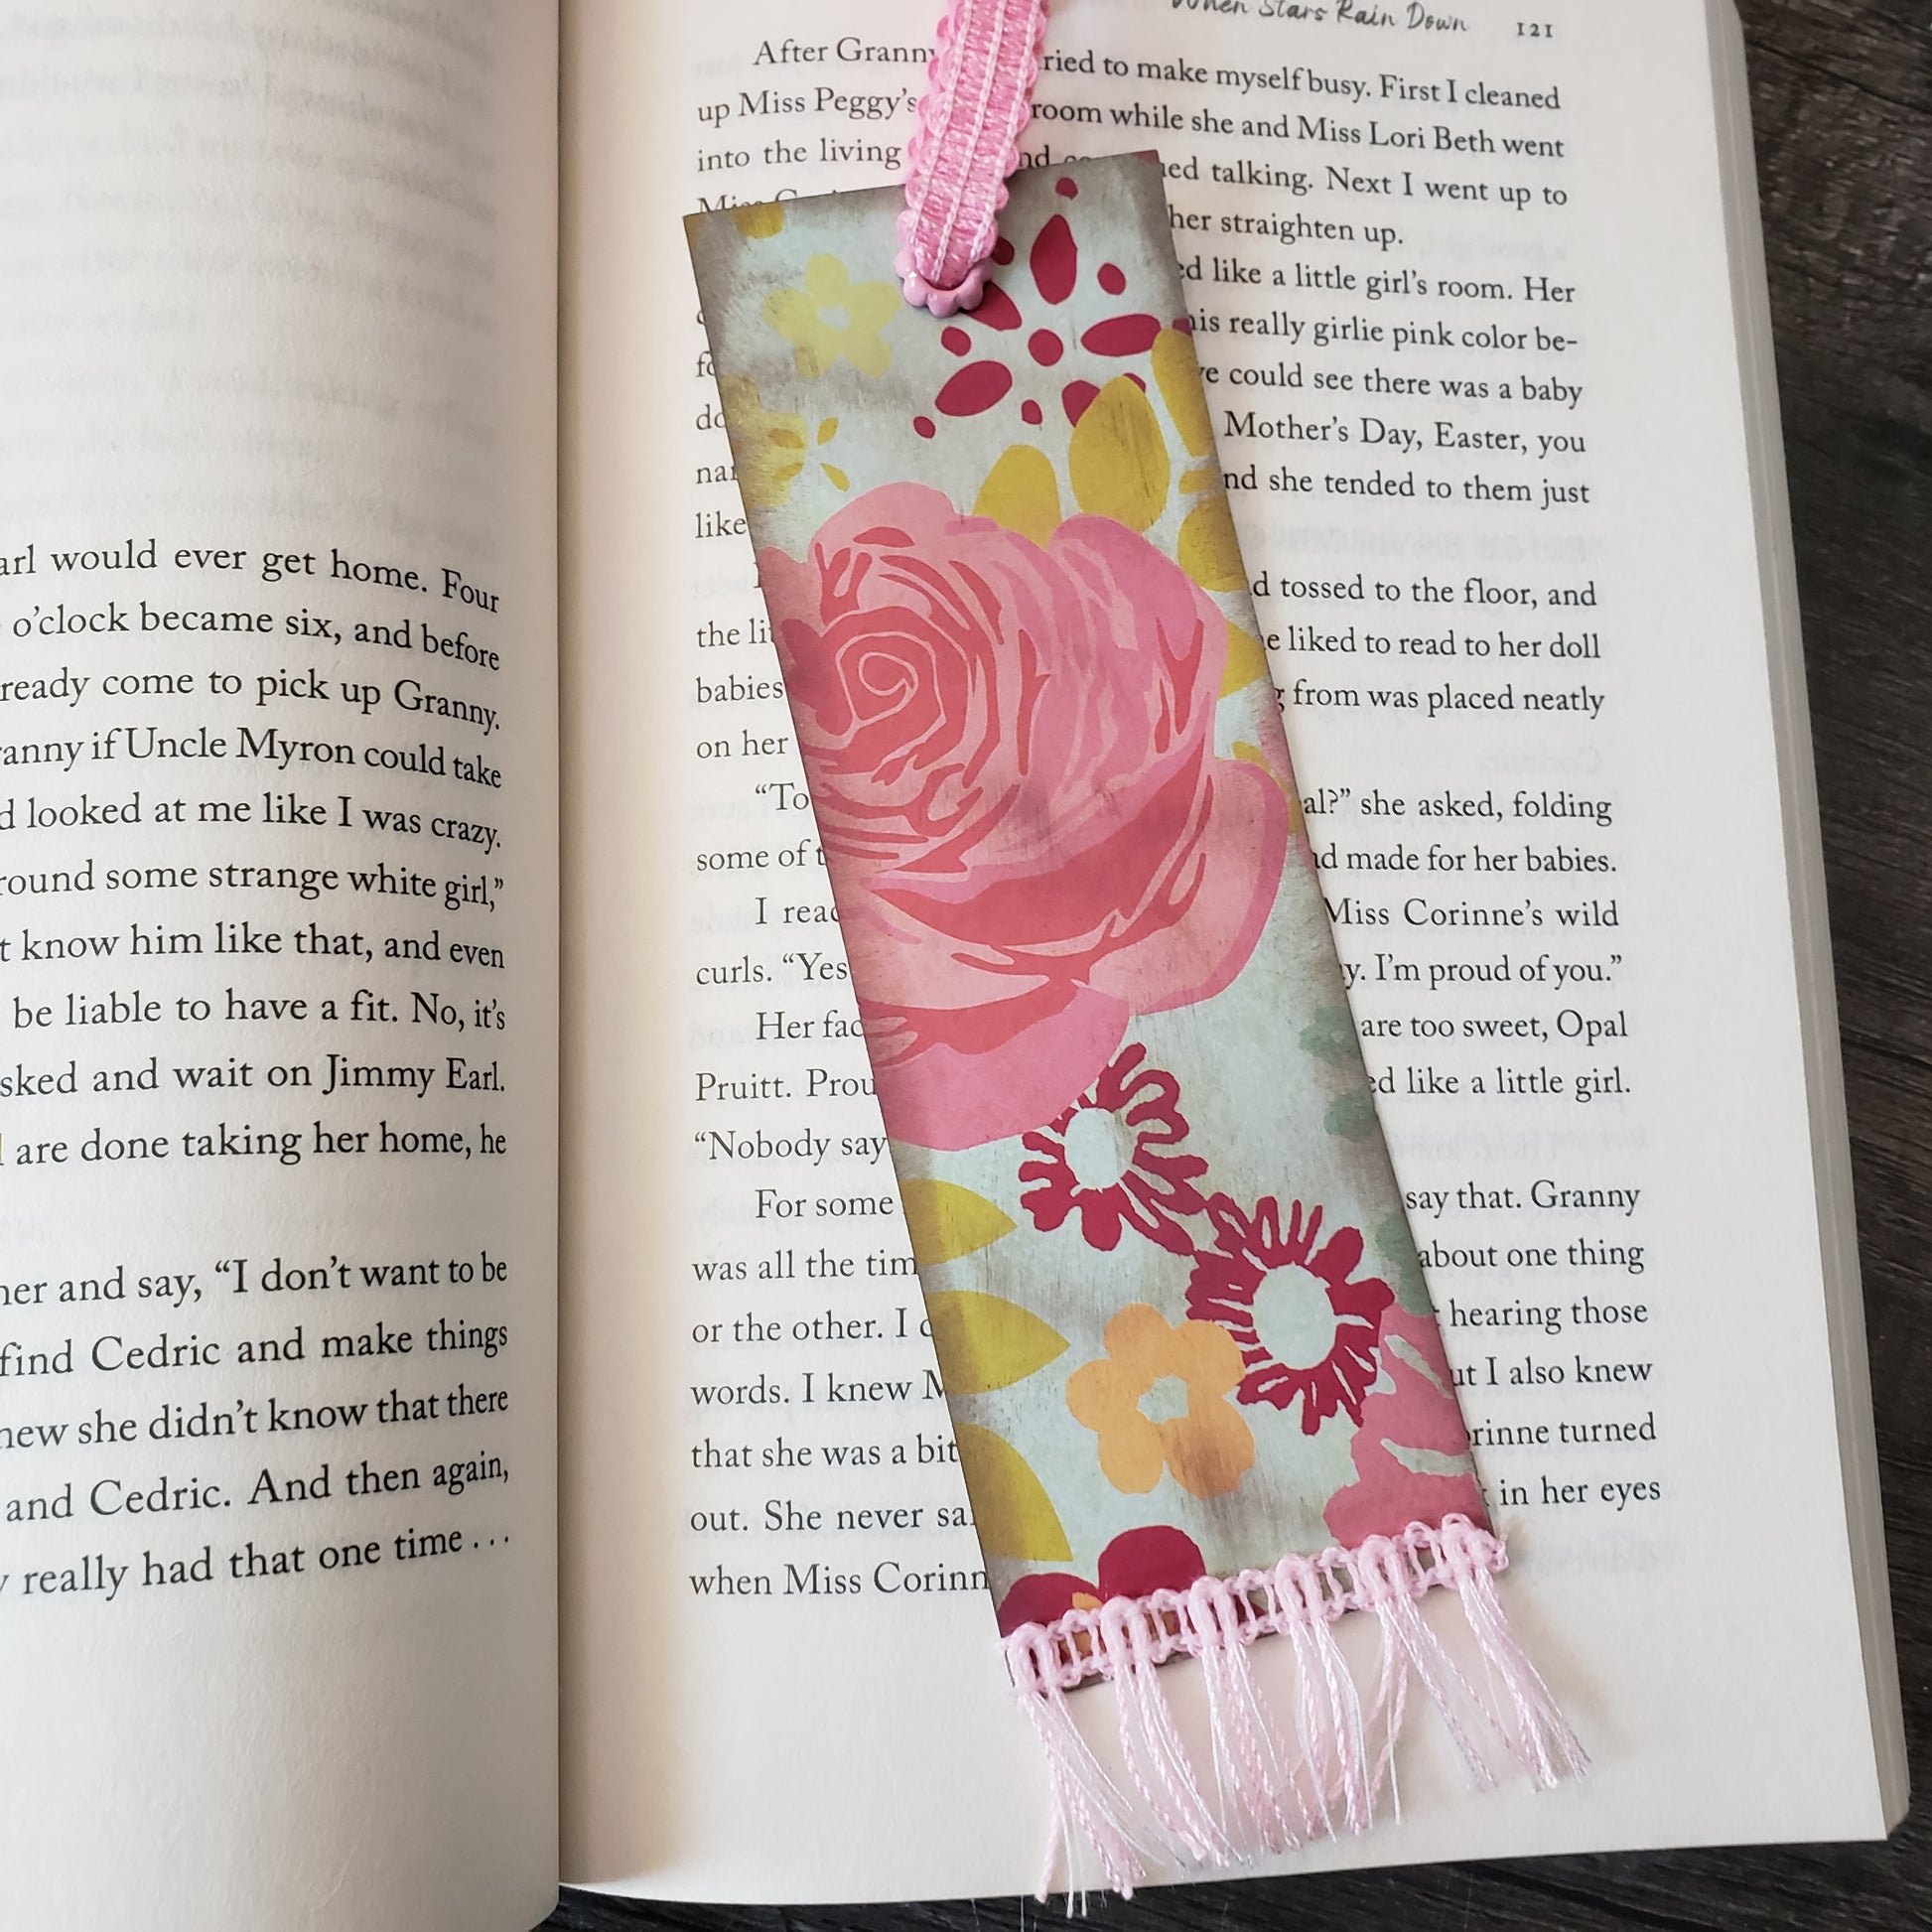 Bookmarks by IF, Bookmarks